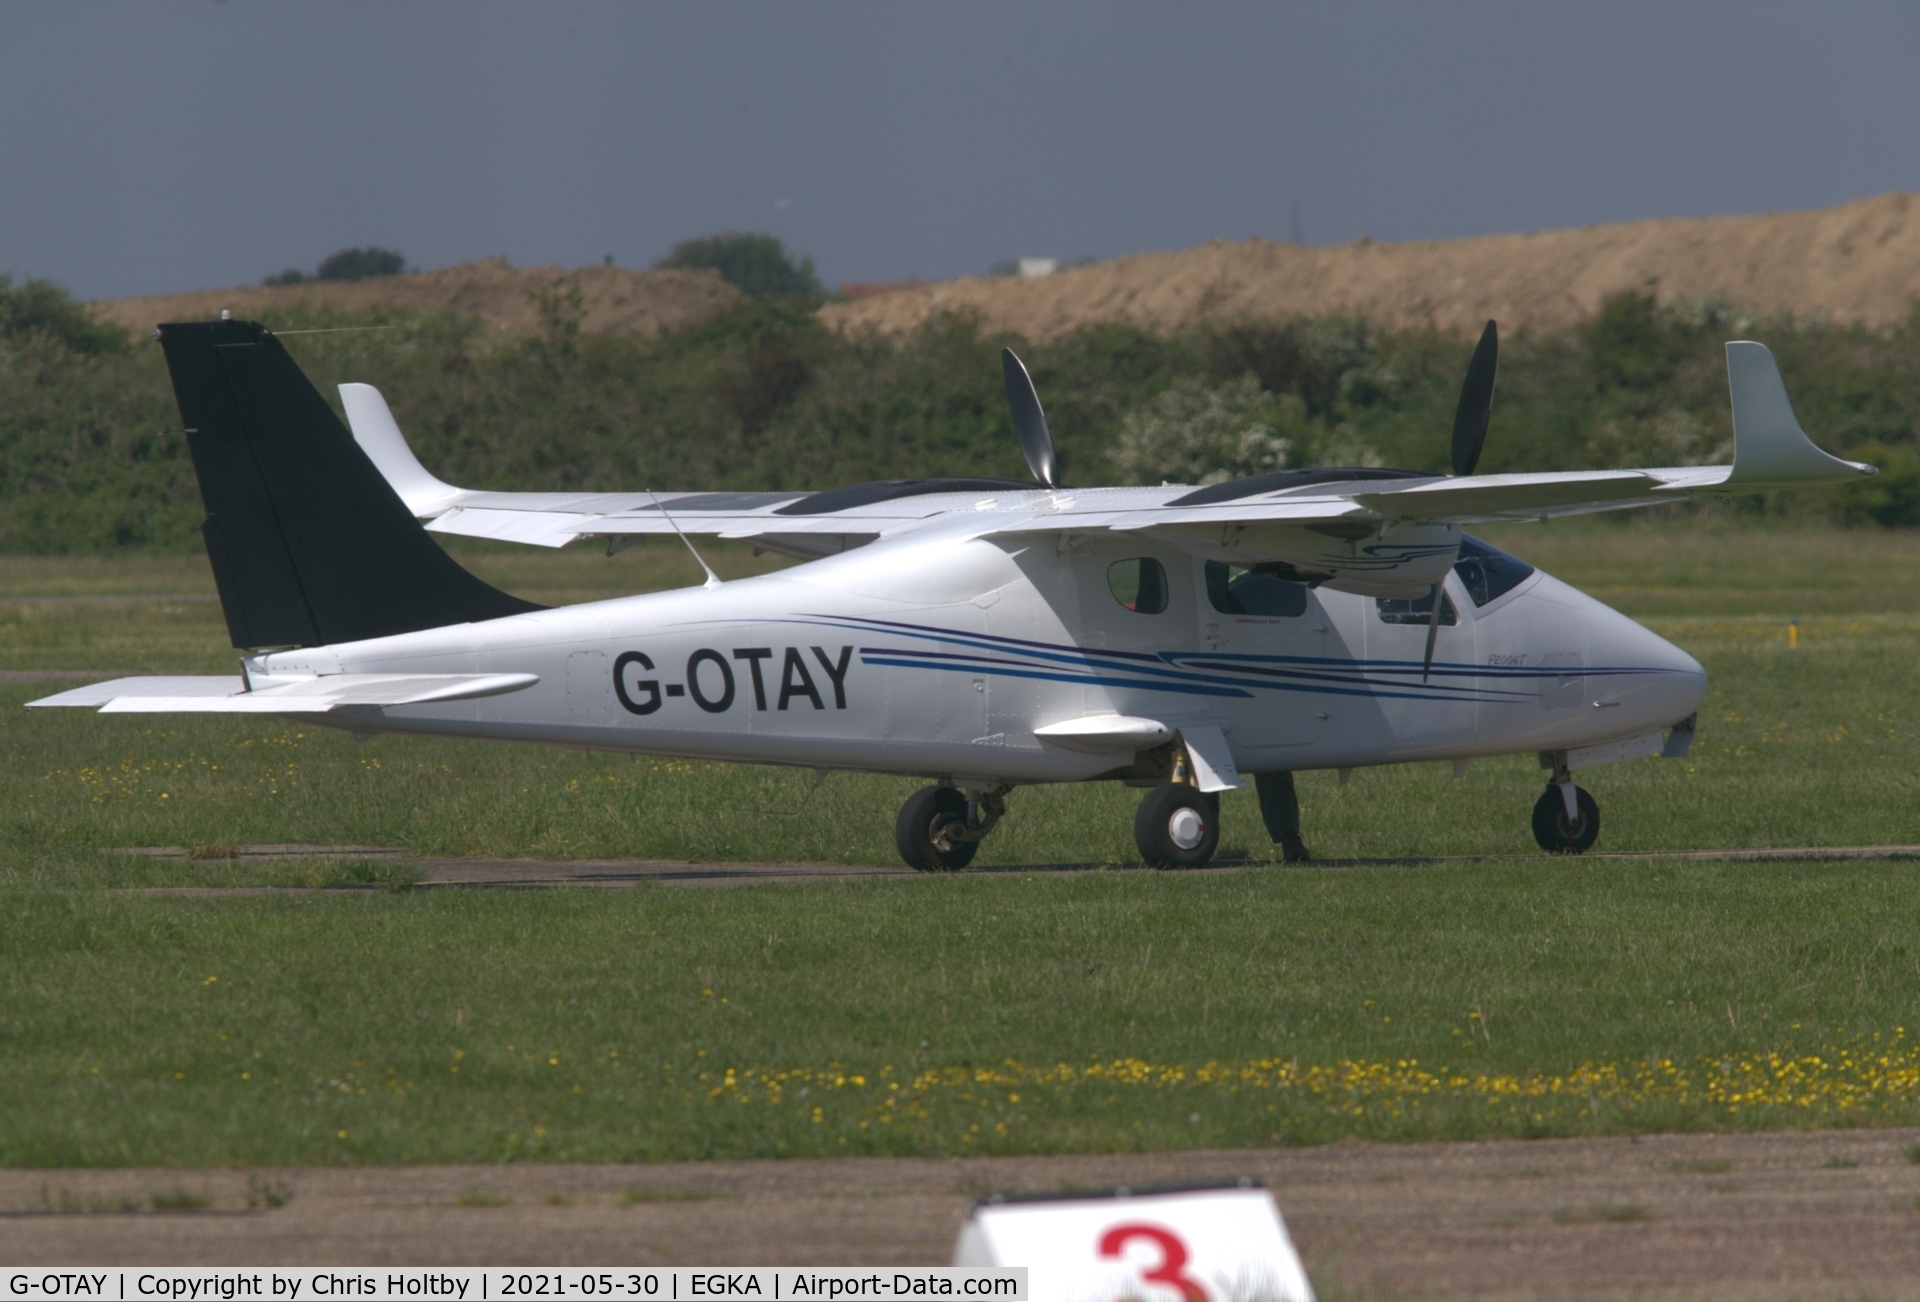 G-OTAY, 2010 Tecnam P-2006T C/N 049, Parked at Shoreham Airport and owned by Nyuki Aviation Ltd., Henfield, West Sussex